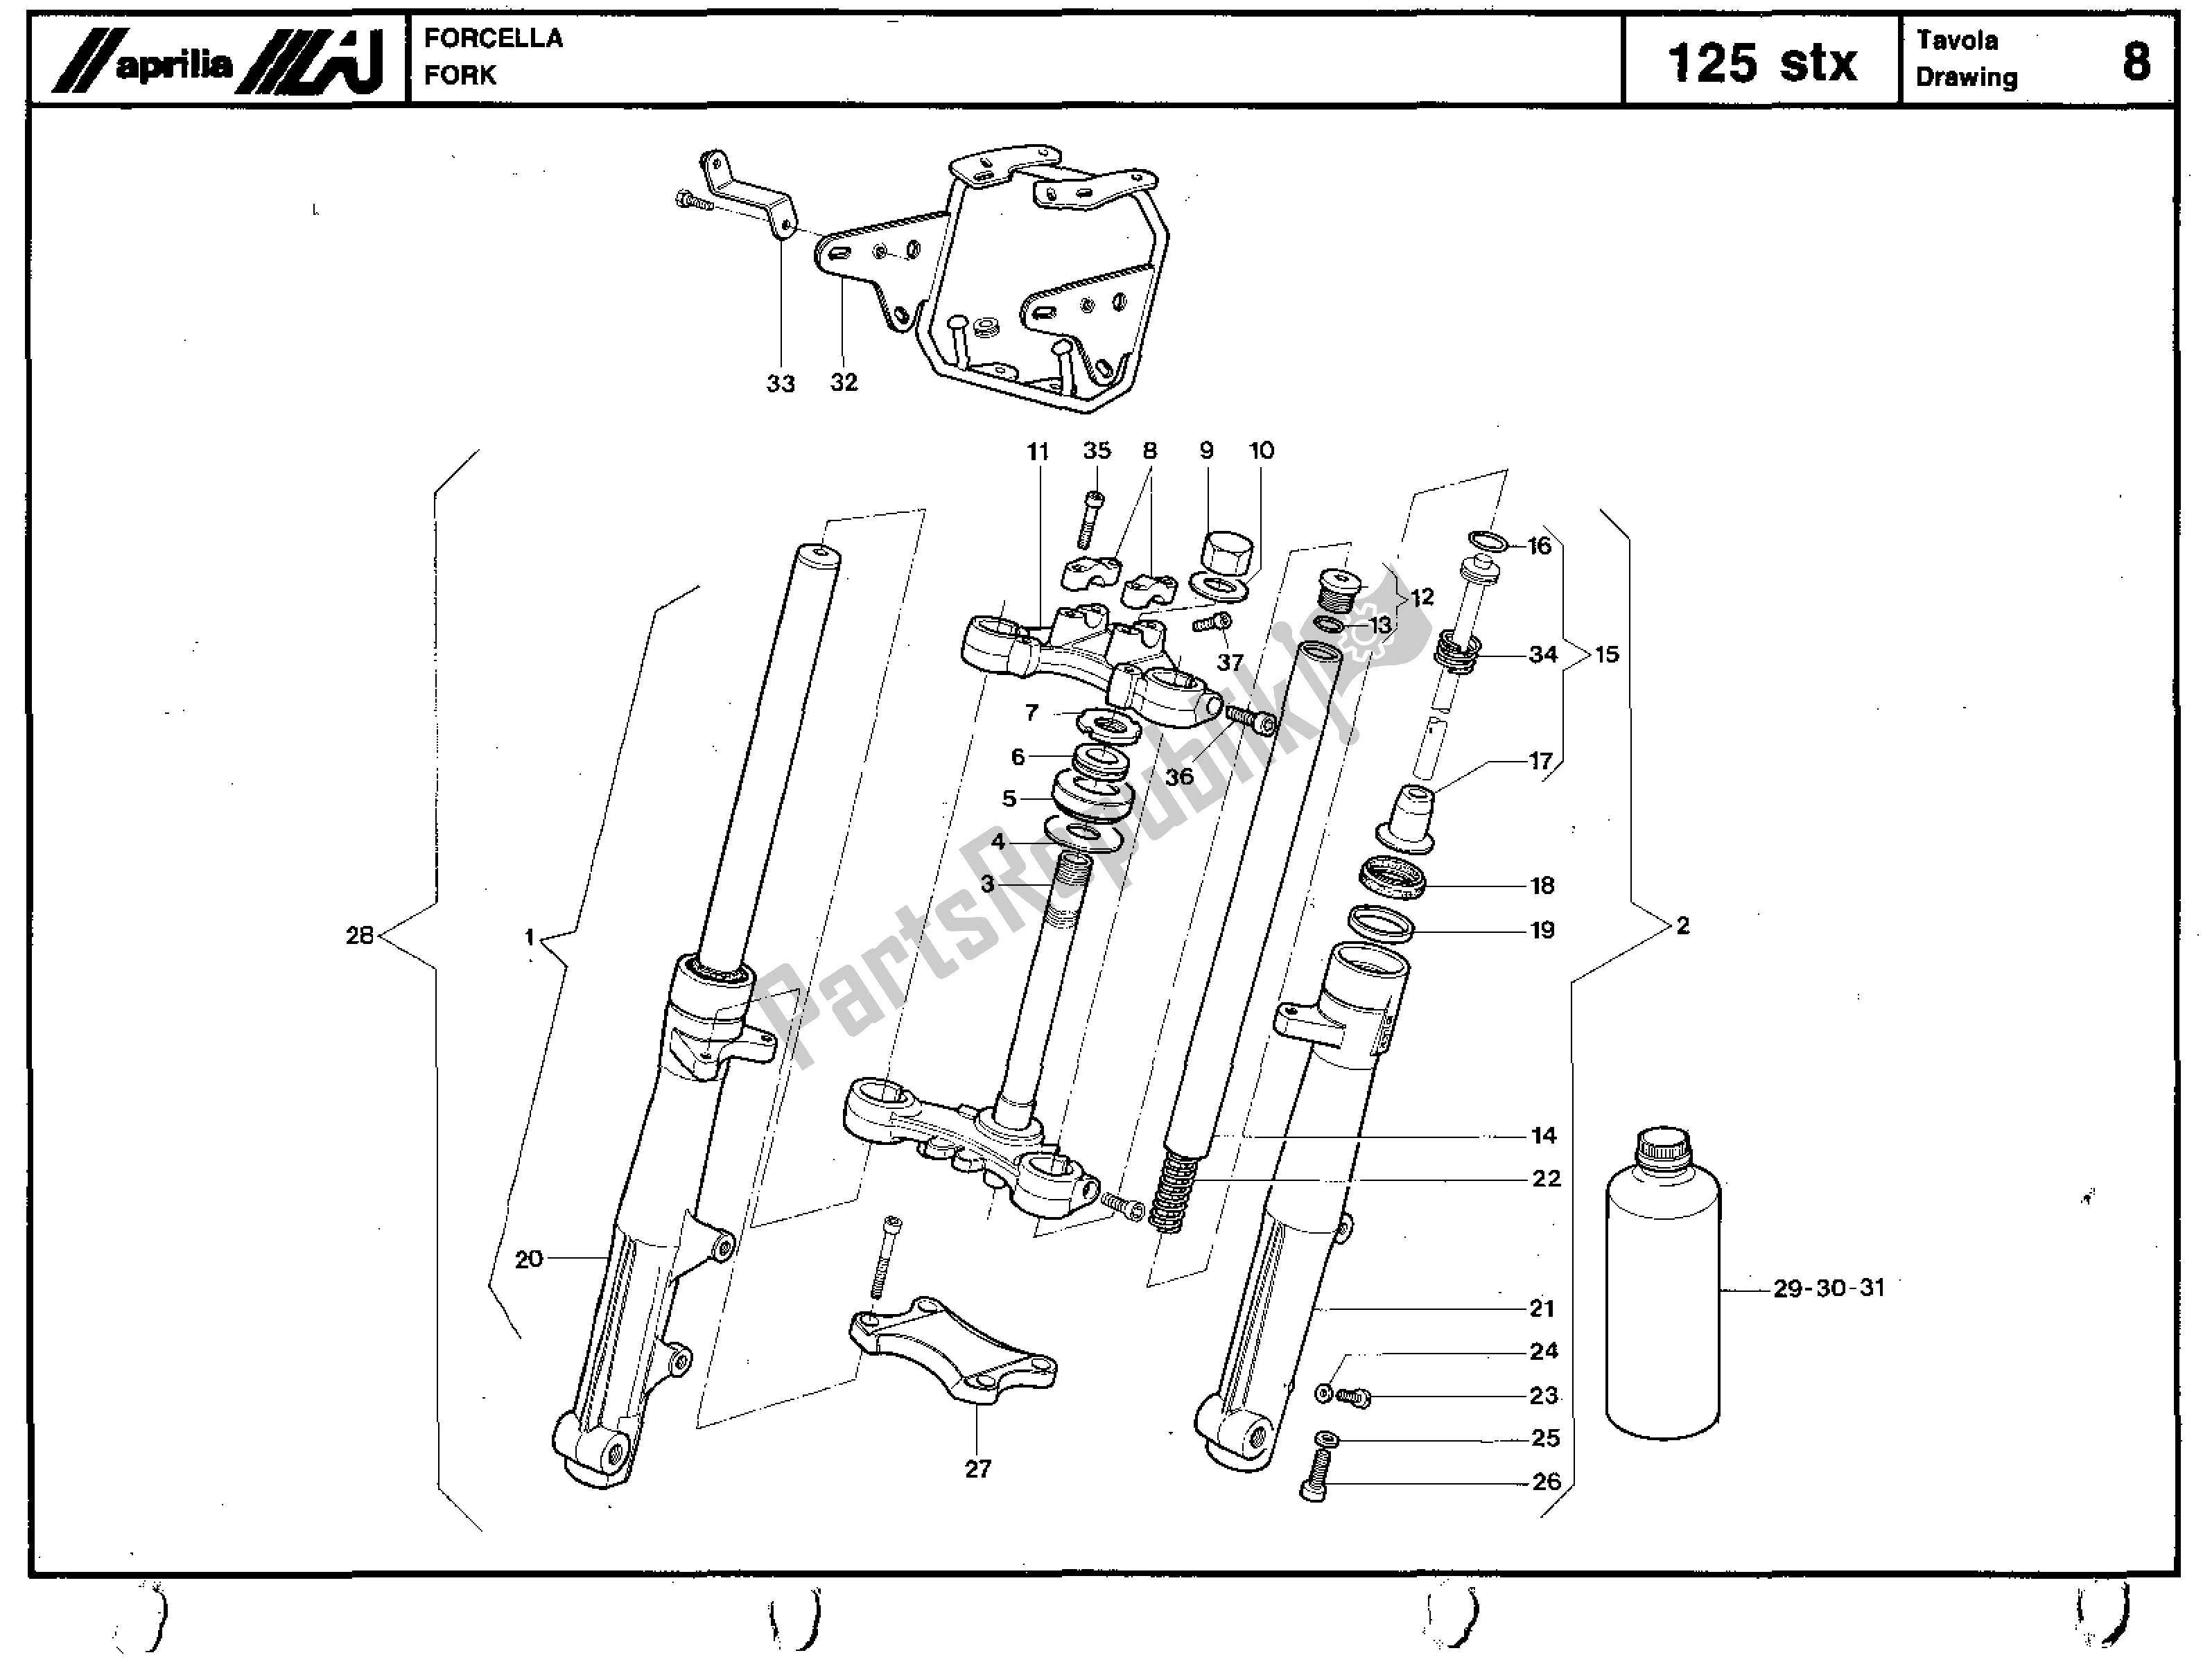 All parts for the Fork of the Aprilia STX 125 1984 - 1986